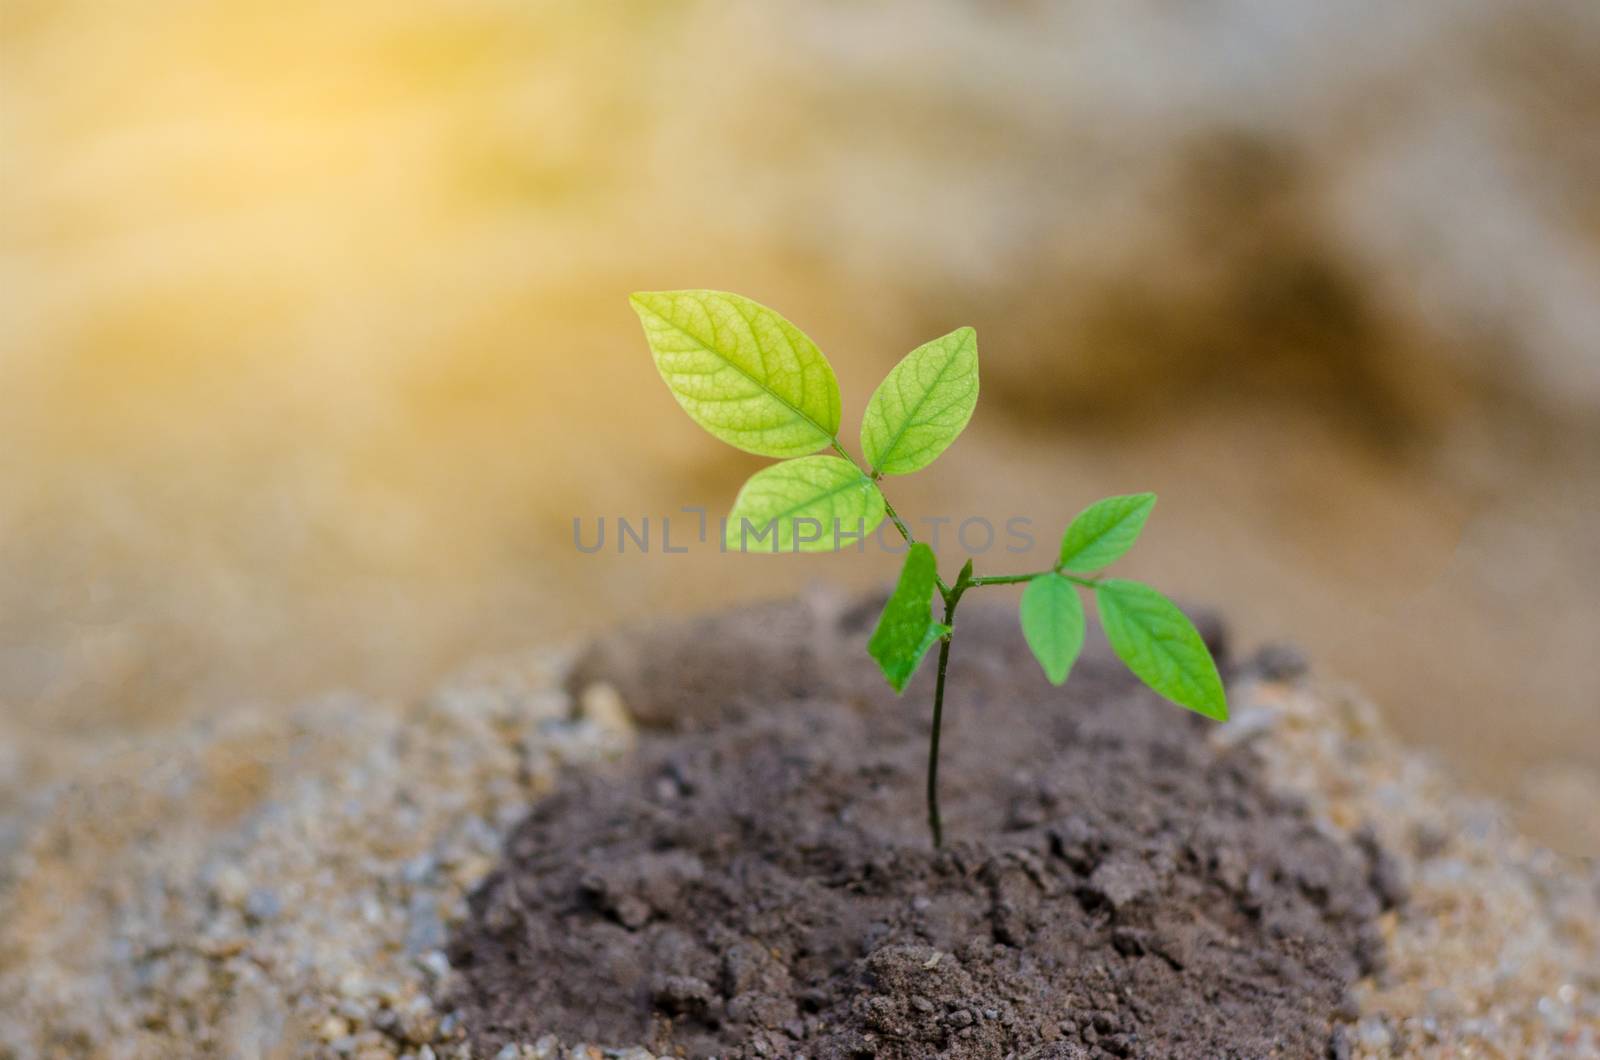 Arid soil sapling Nature Conservation Prevention Global Warming by sarayut_thaneerat